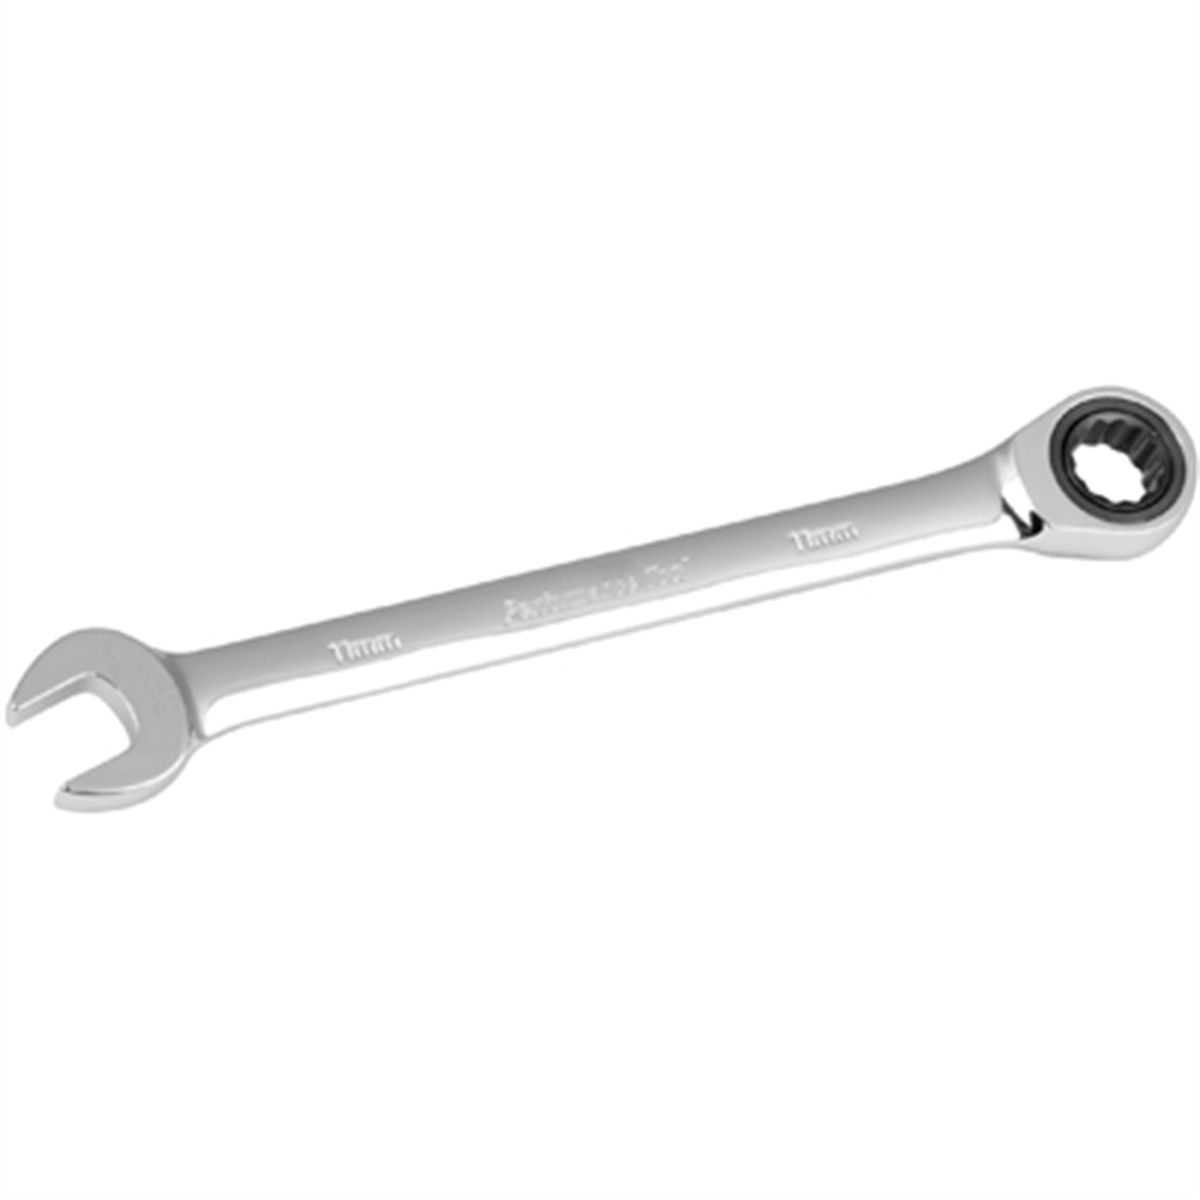 11mm Ratcheting Wrench